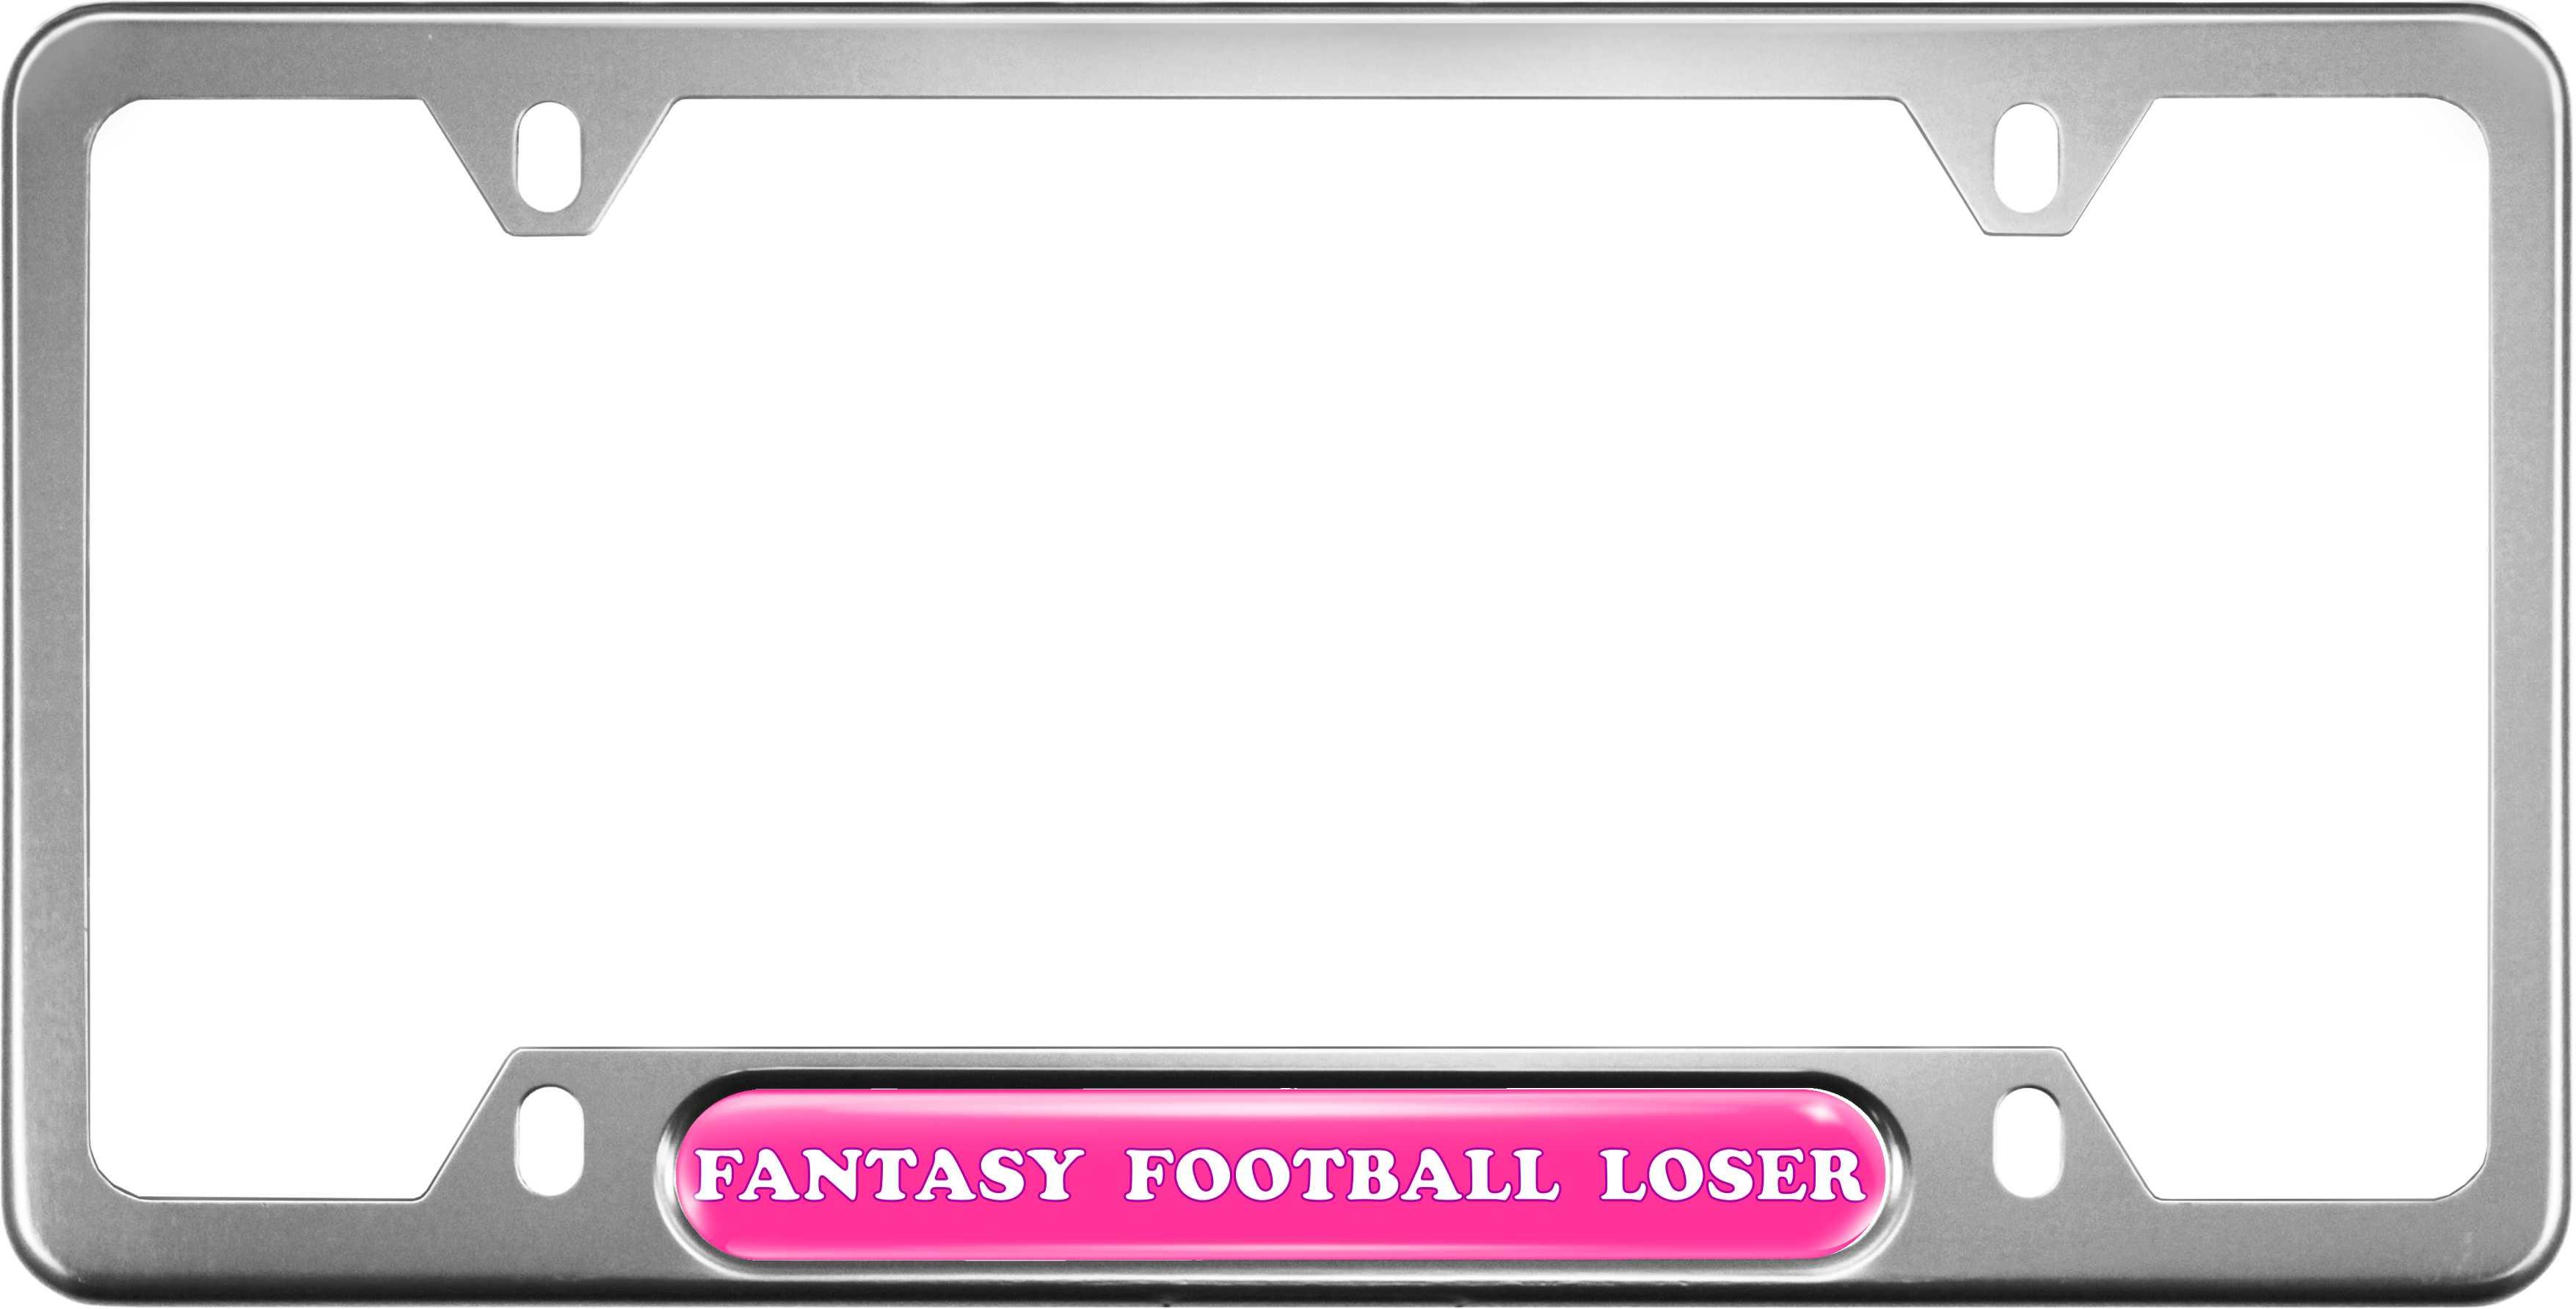 Fantasy Football Loser - Anodized Aluminum License Plate Frame with Clear Dome - Silver